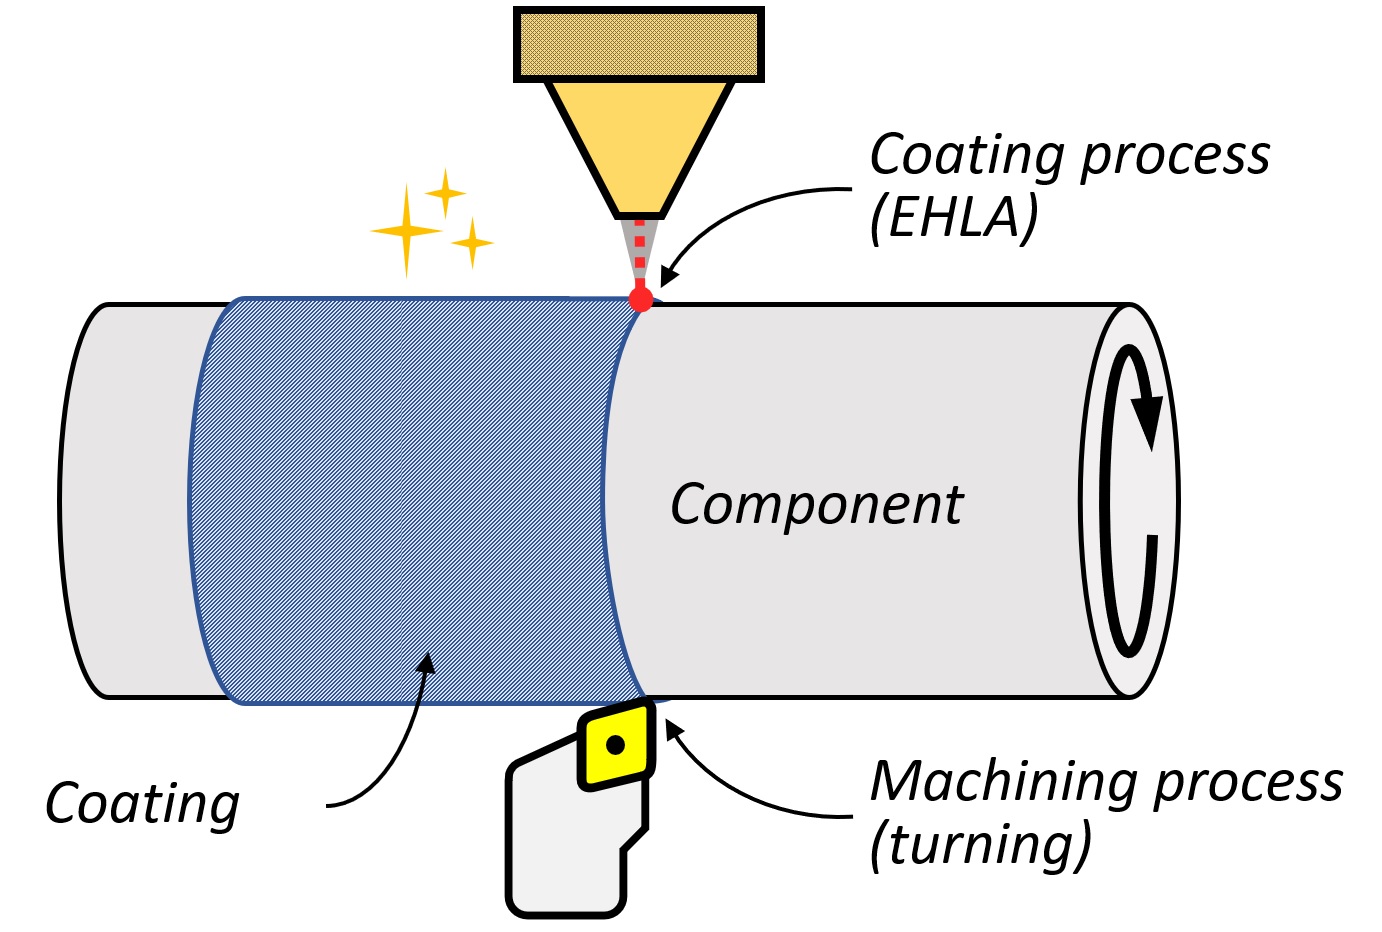 Schematic representation of Simultaneous Machining and Coating (SMaC). High-hardness coating materials are machined immediately after laser material deposition. The new process is faster and more economical than conventional methods.